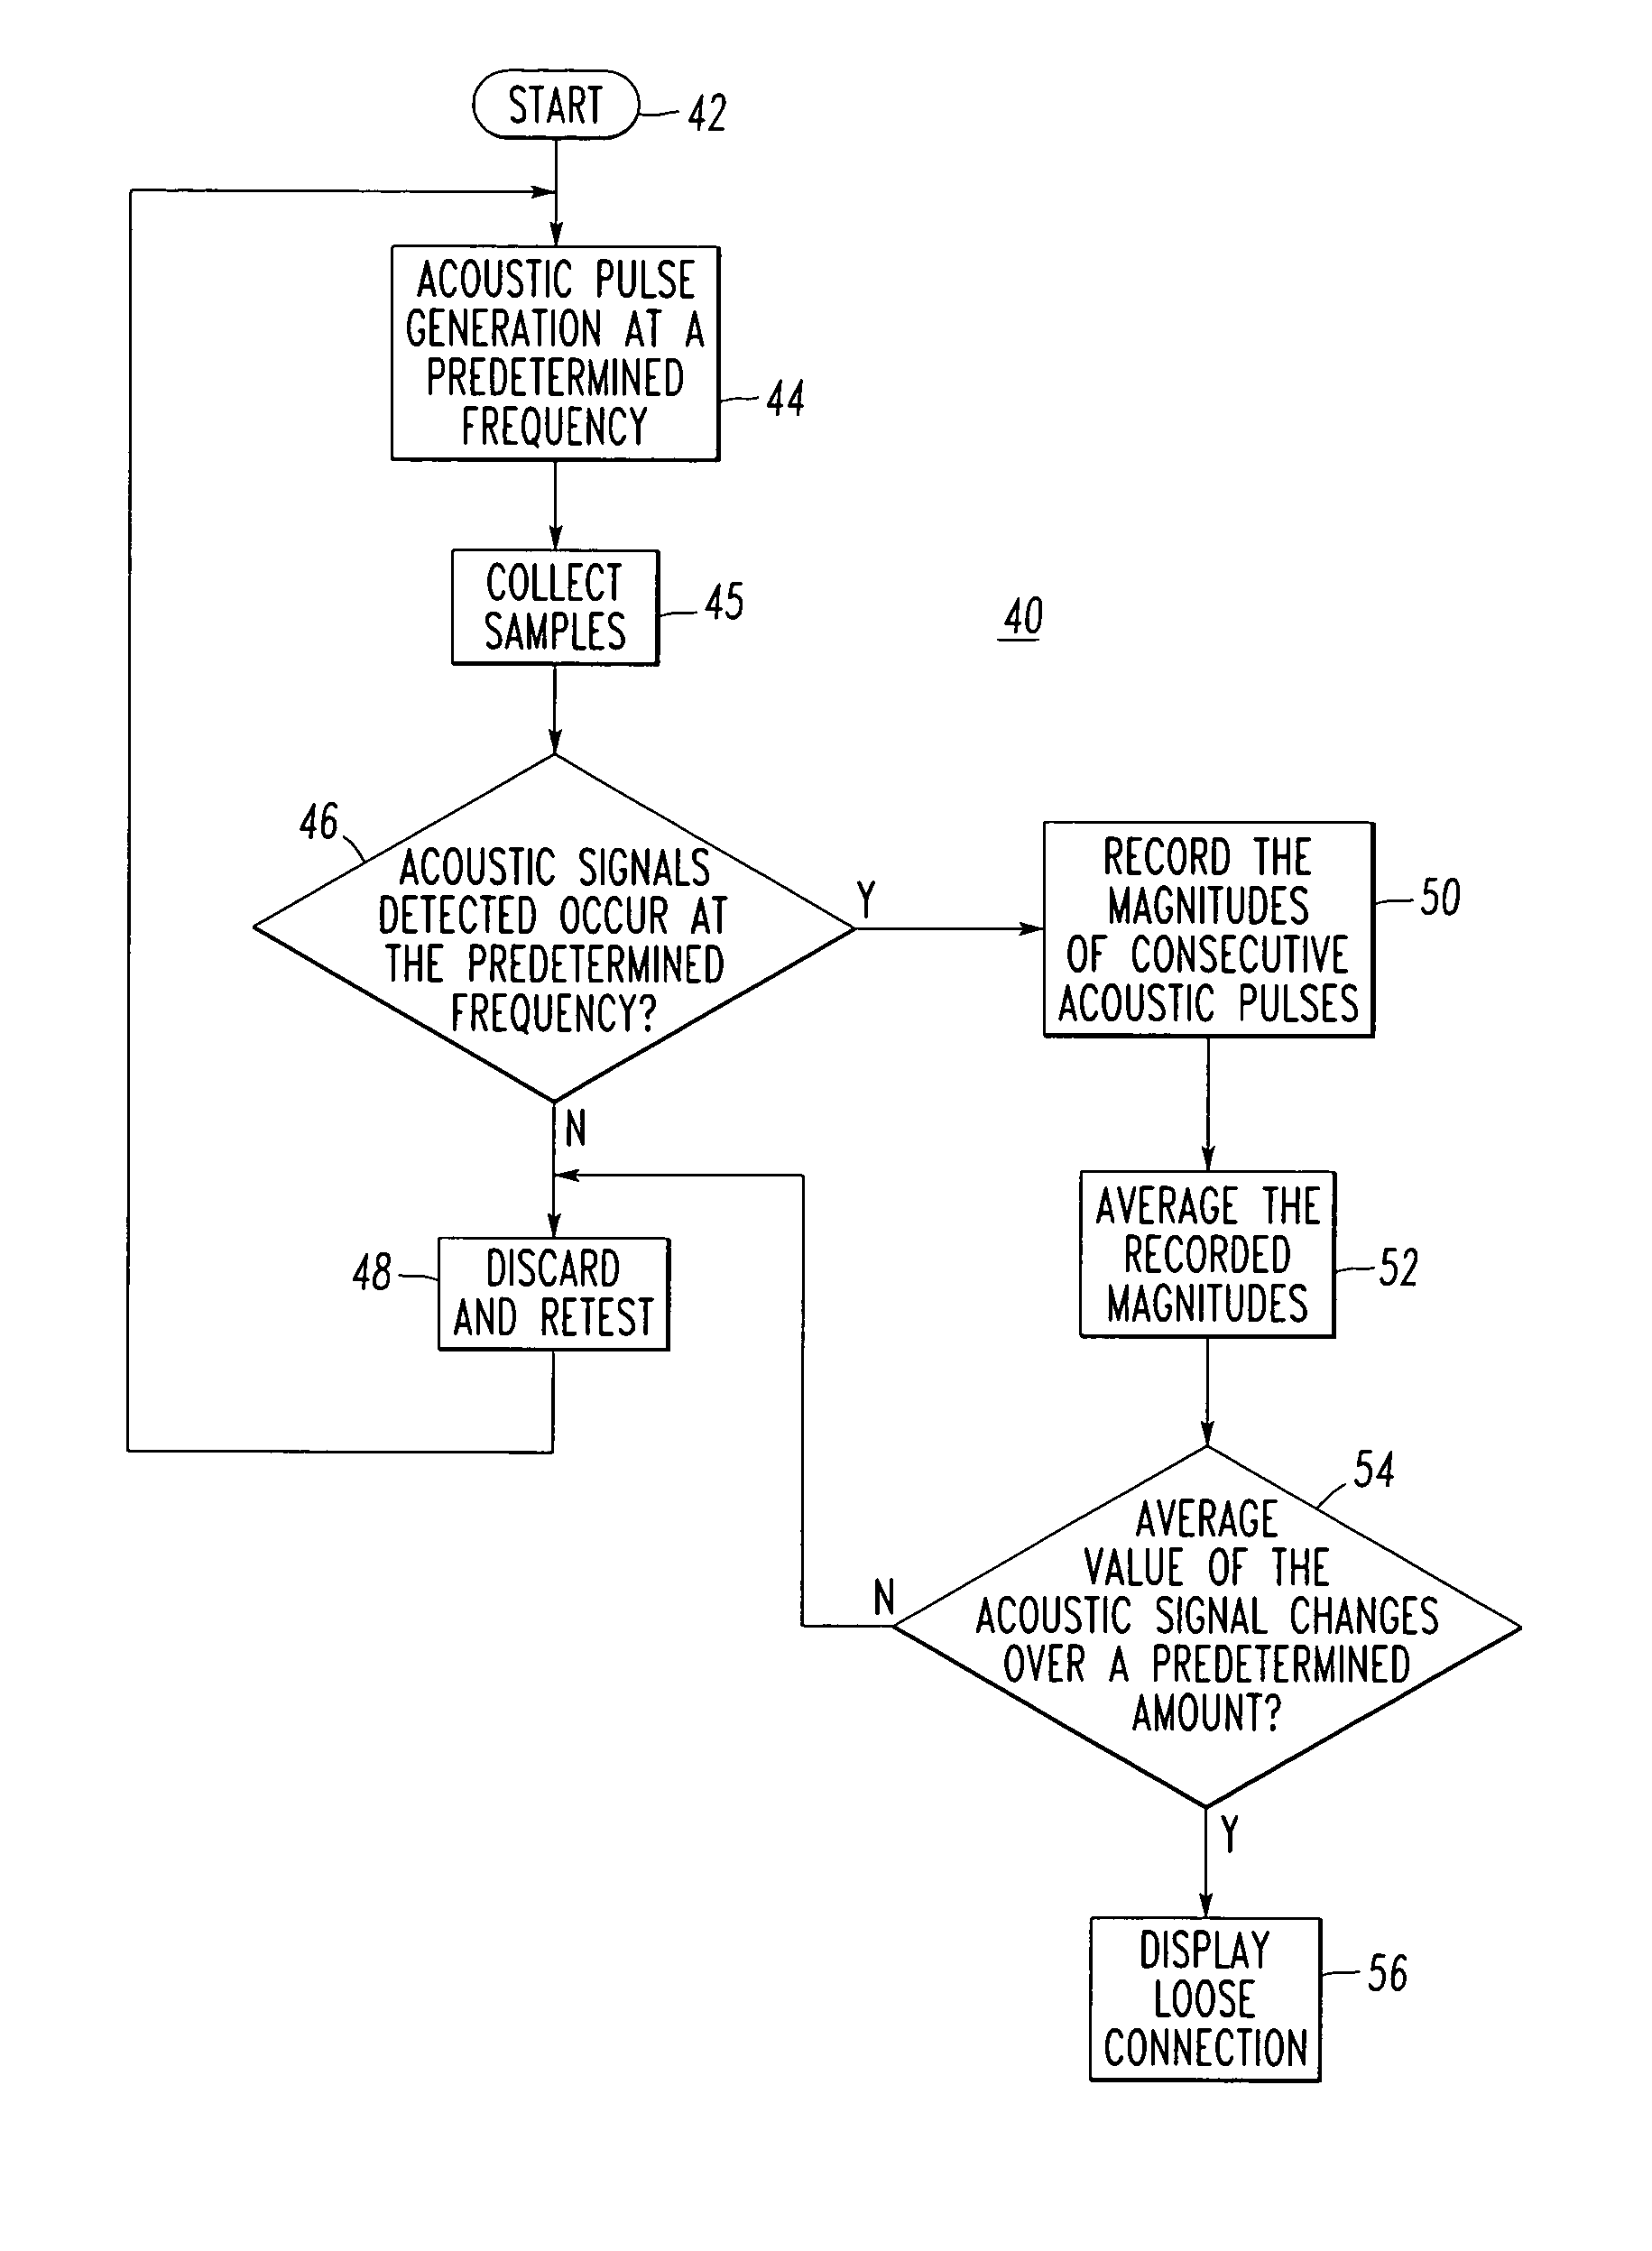 Electrical switching apparatus and method employing active acoustic sensing to detect an electrical conductivity fault of a power circuit